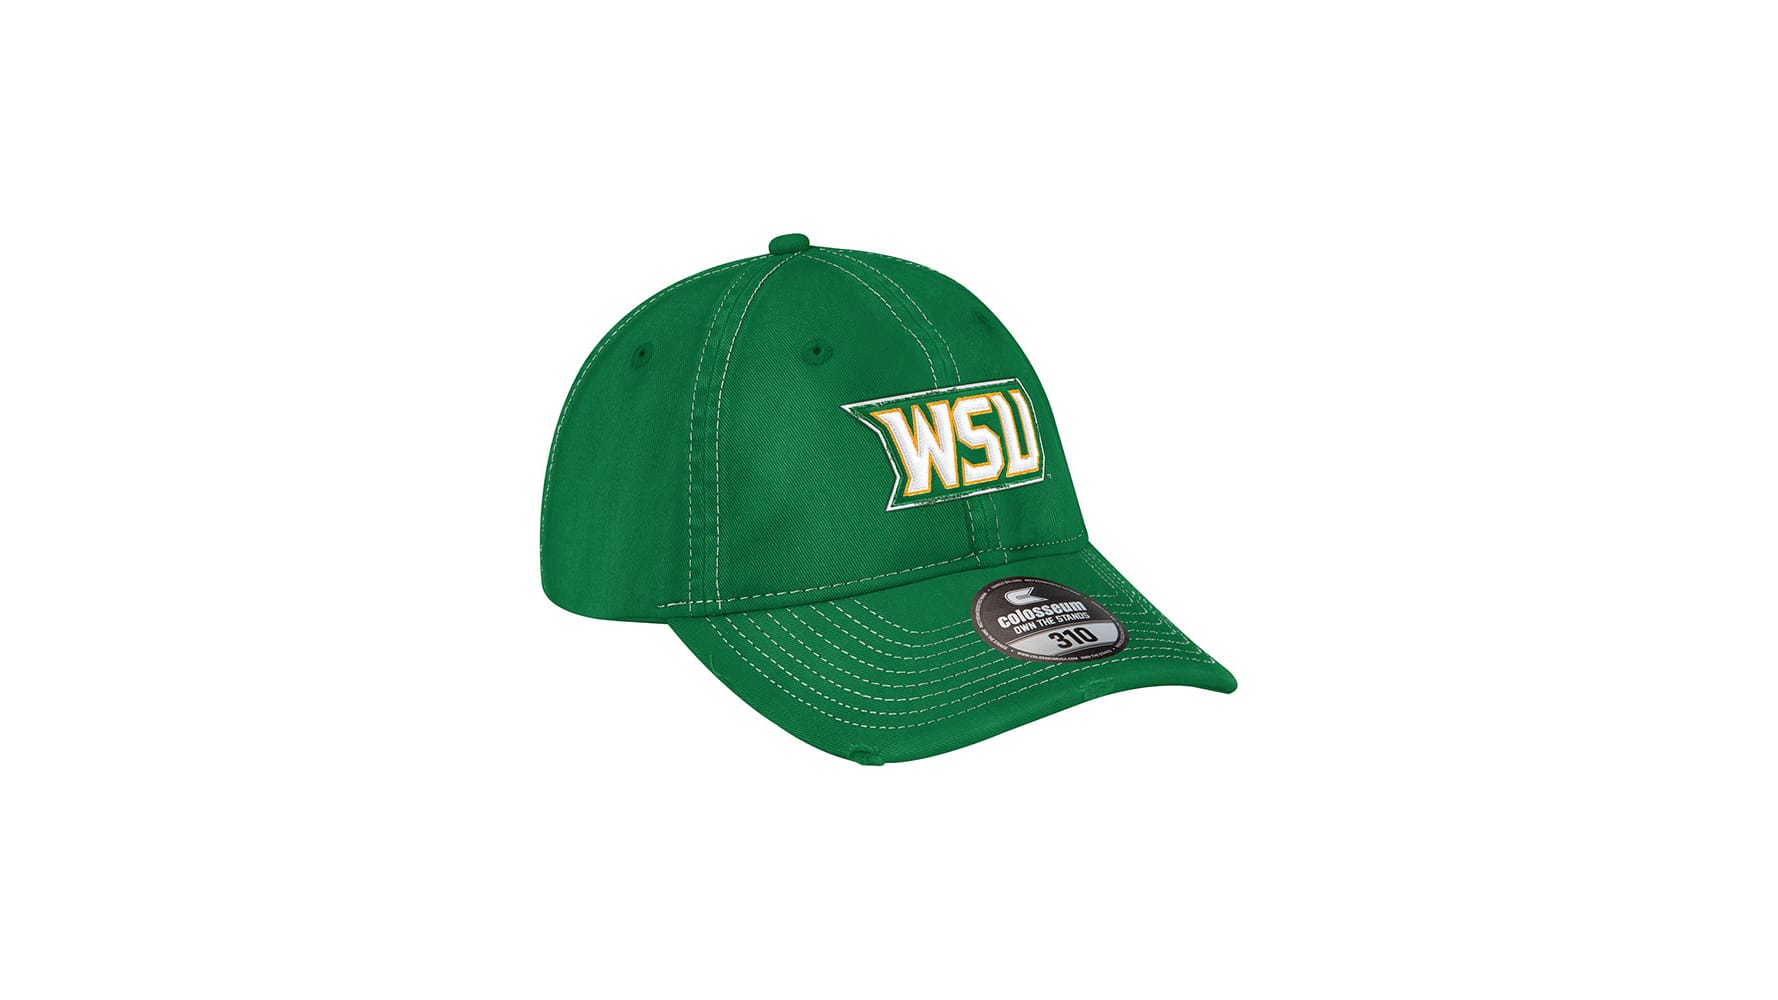 Wright State Raiders NCAA Adjustable Mossy Oak Snow Camo Strap Back Hat 